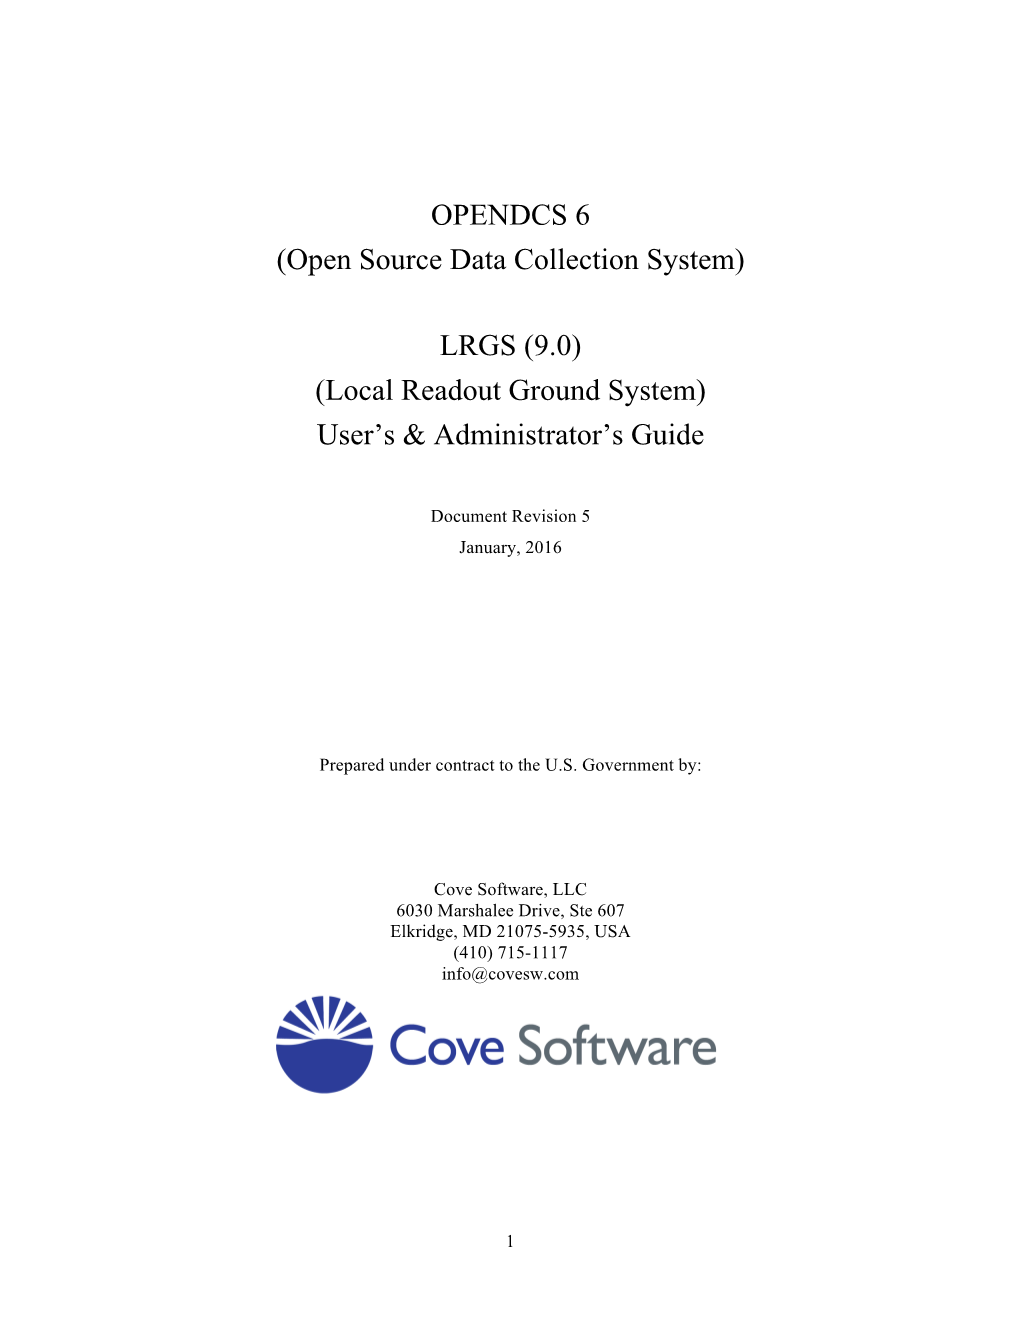 OPENDCS 6 (Open Source Data Collection System) LRGS (9.0)